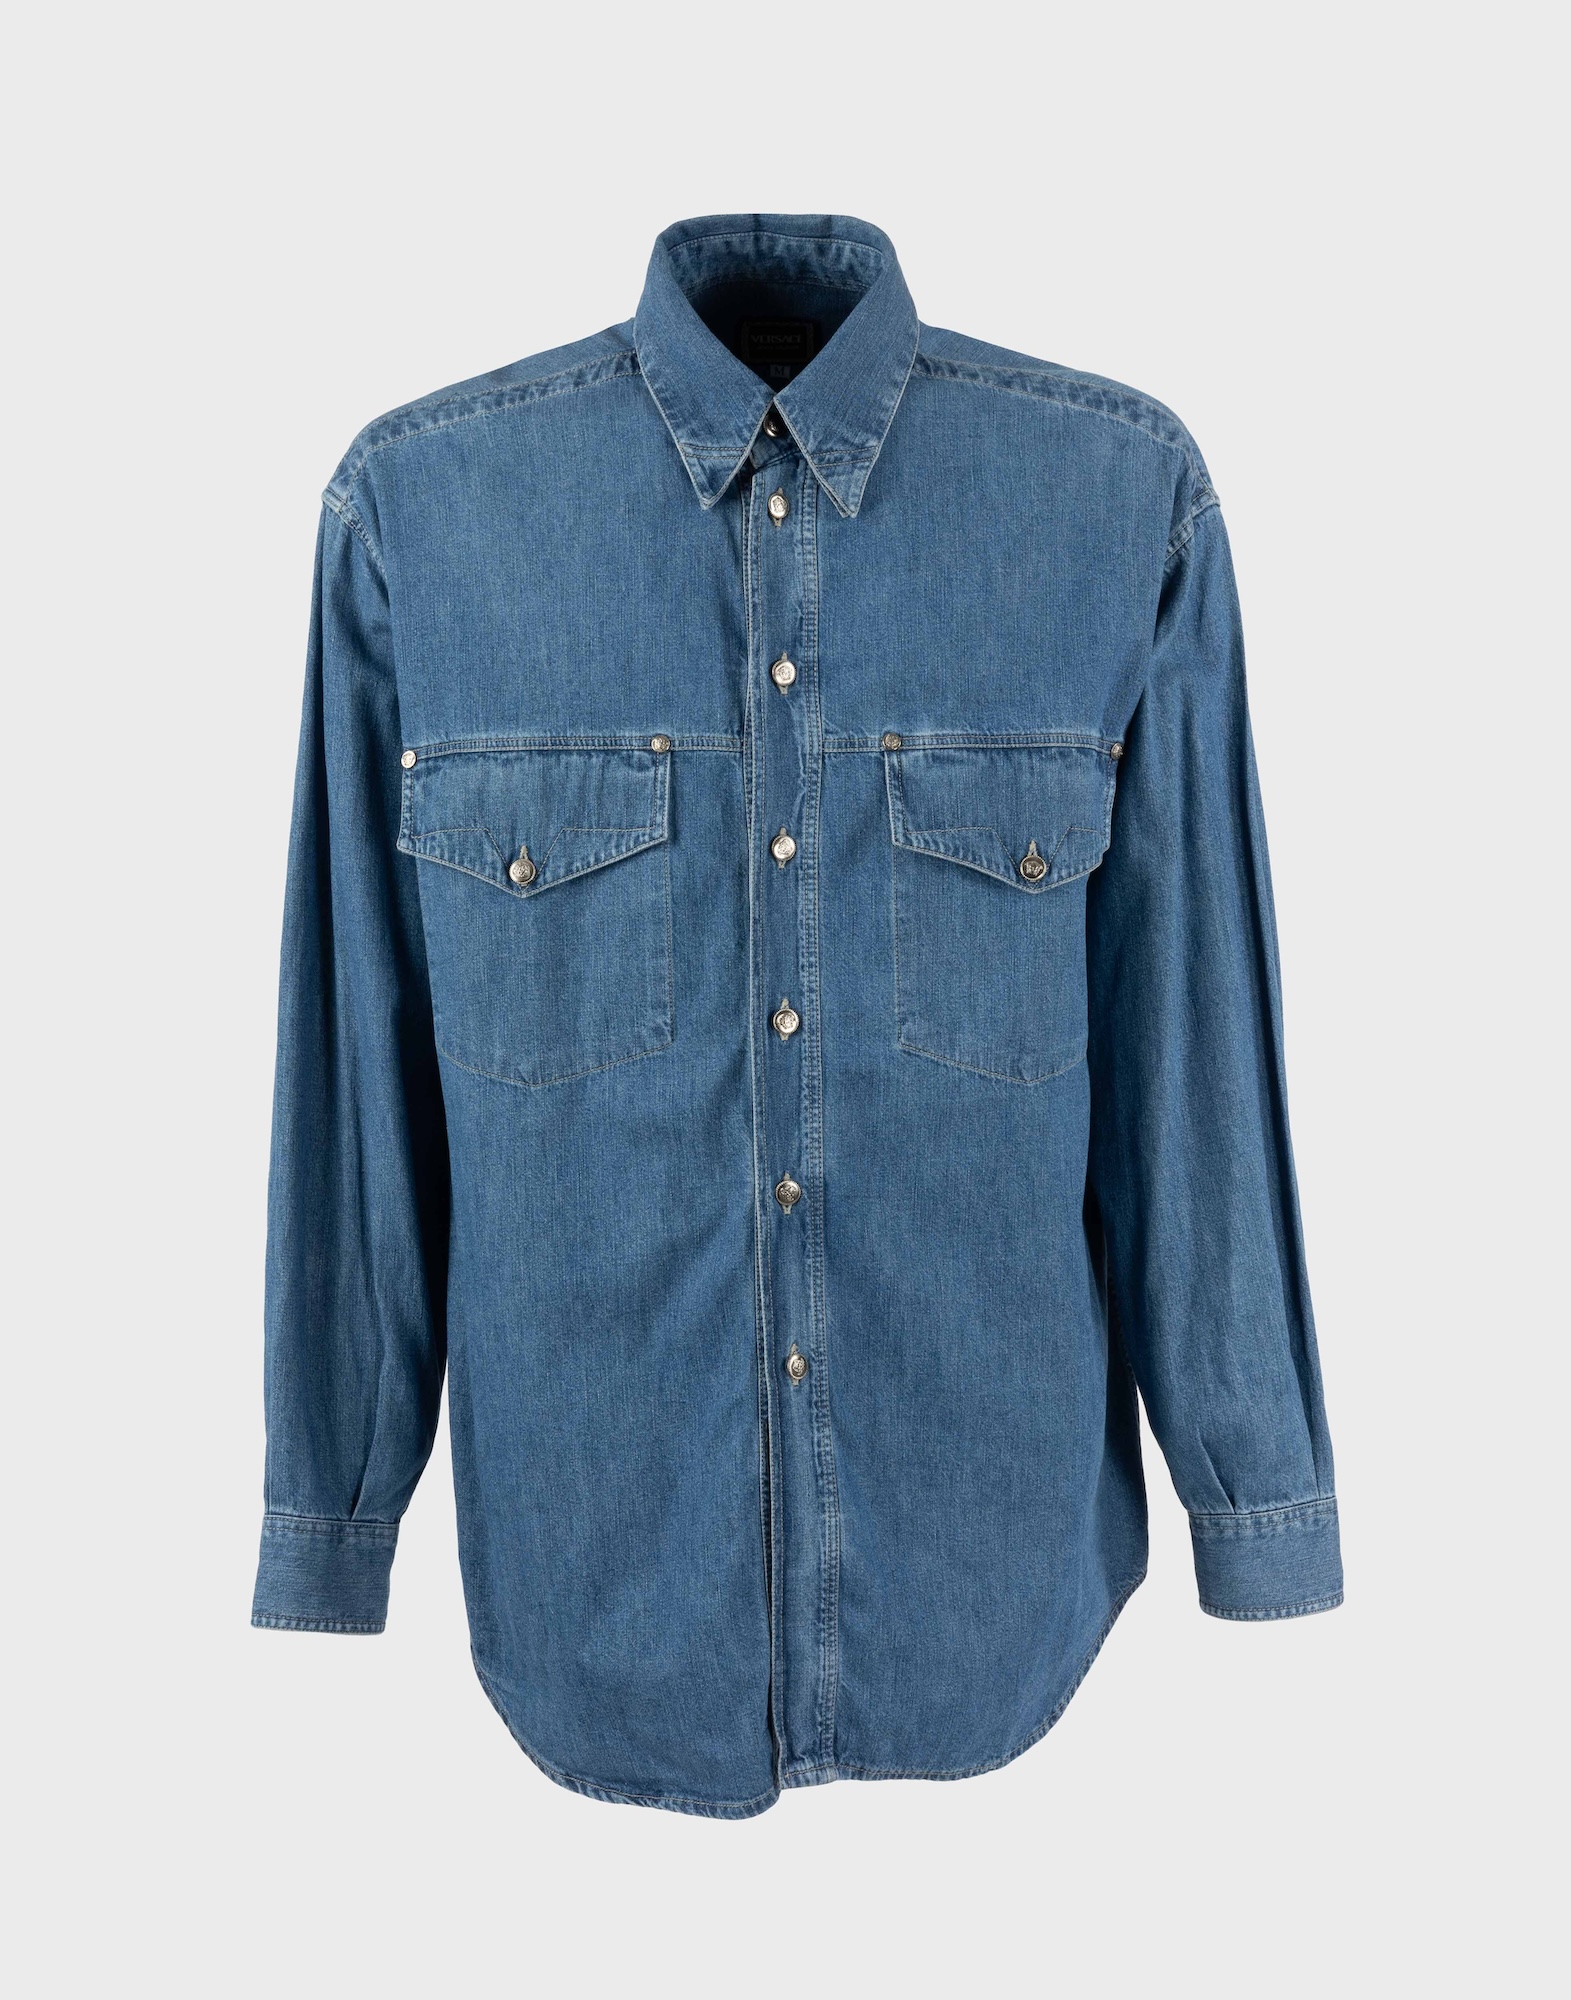 men's shirt in light denim-effect cotton with long sleeves, silver-coloured button placket with medusa head